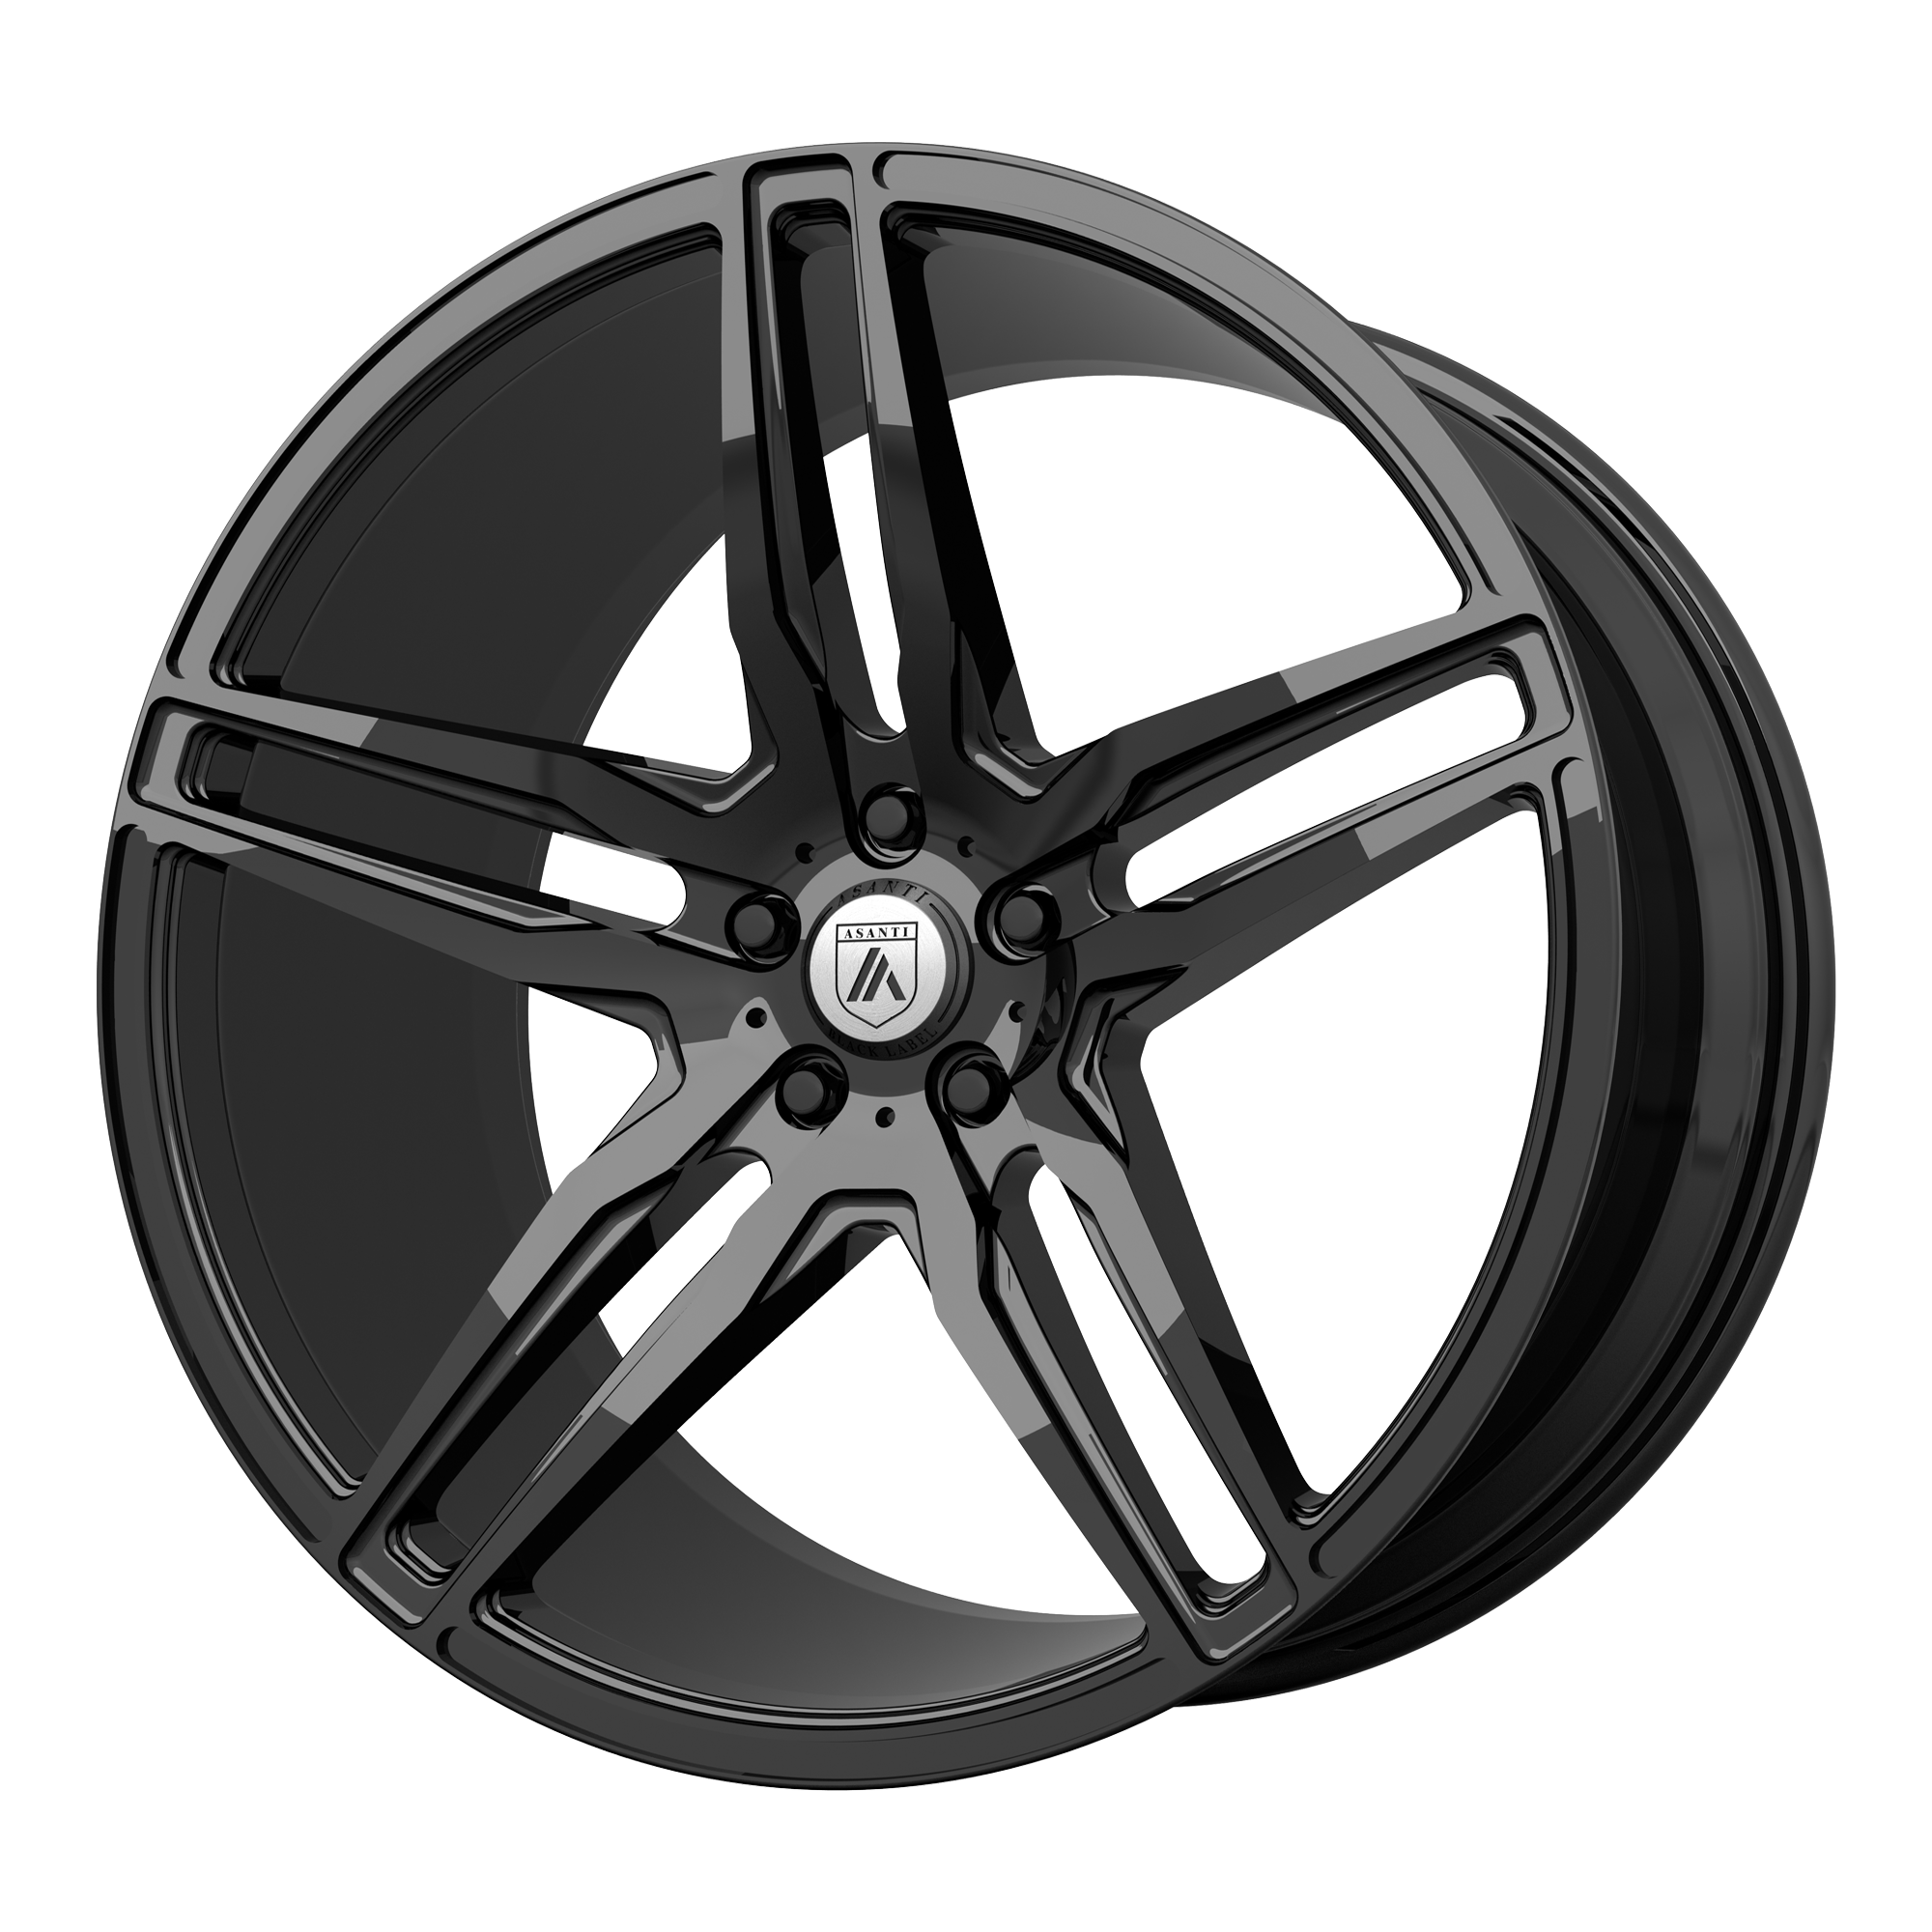 ORION 20x9 Blank GLOSS BLACK (15.00 - 34.00 mm) - Tires and Engine Performance